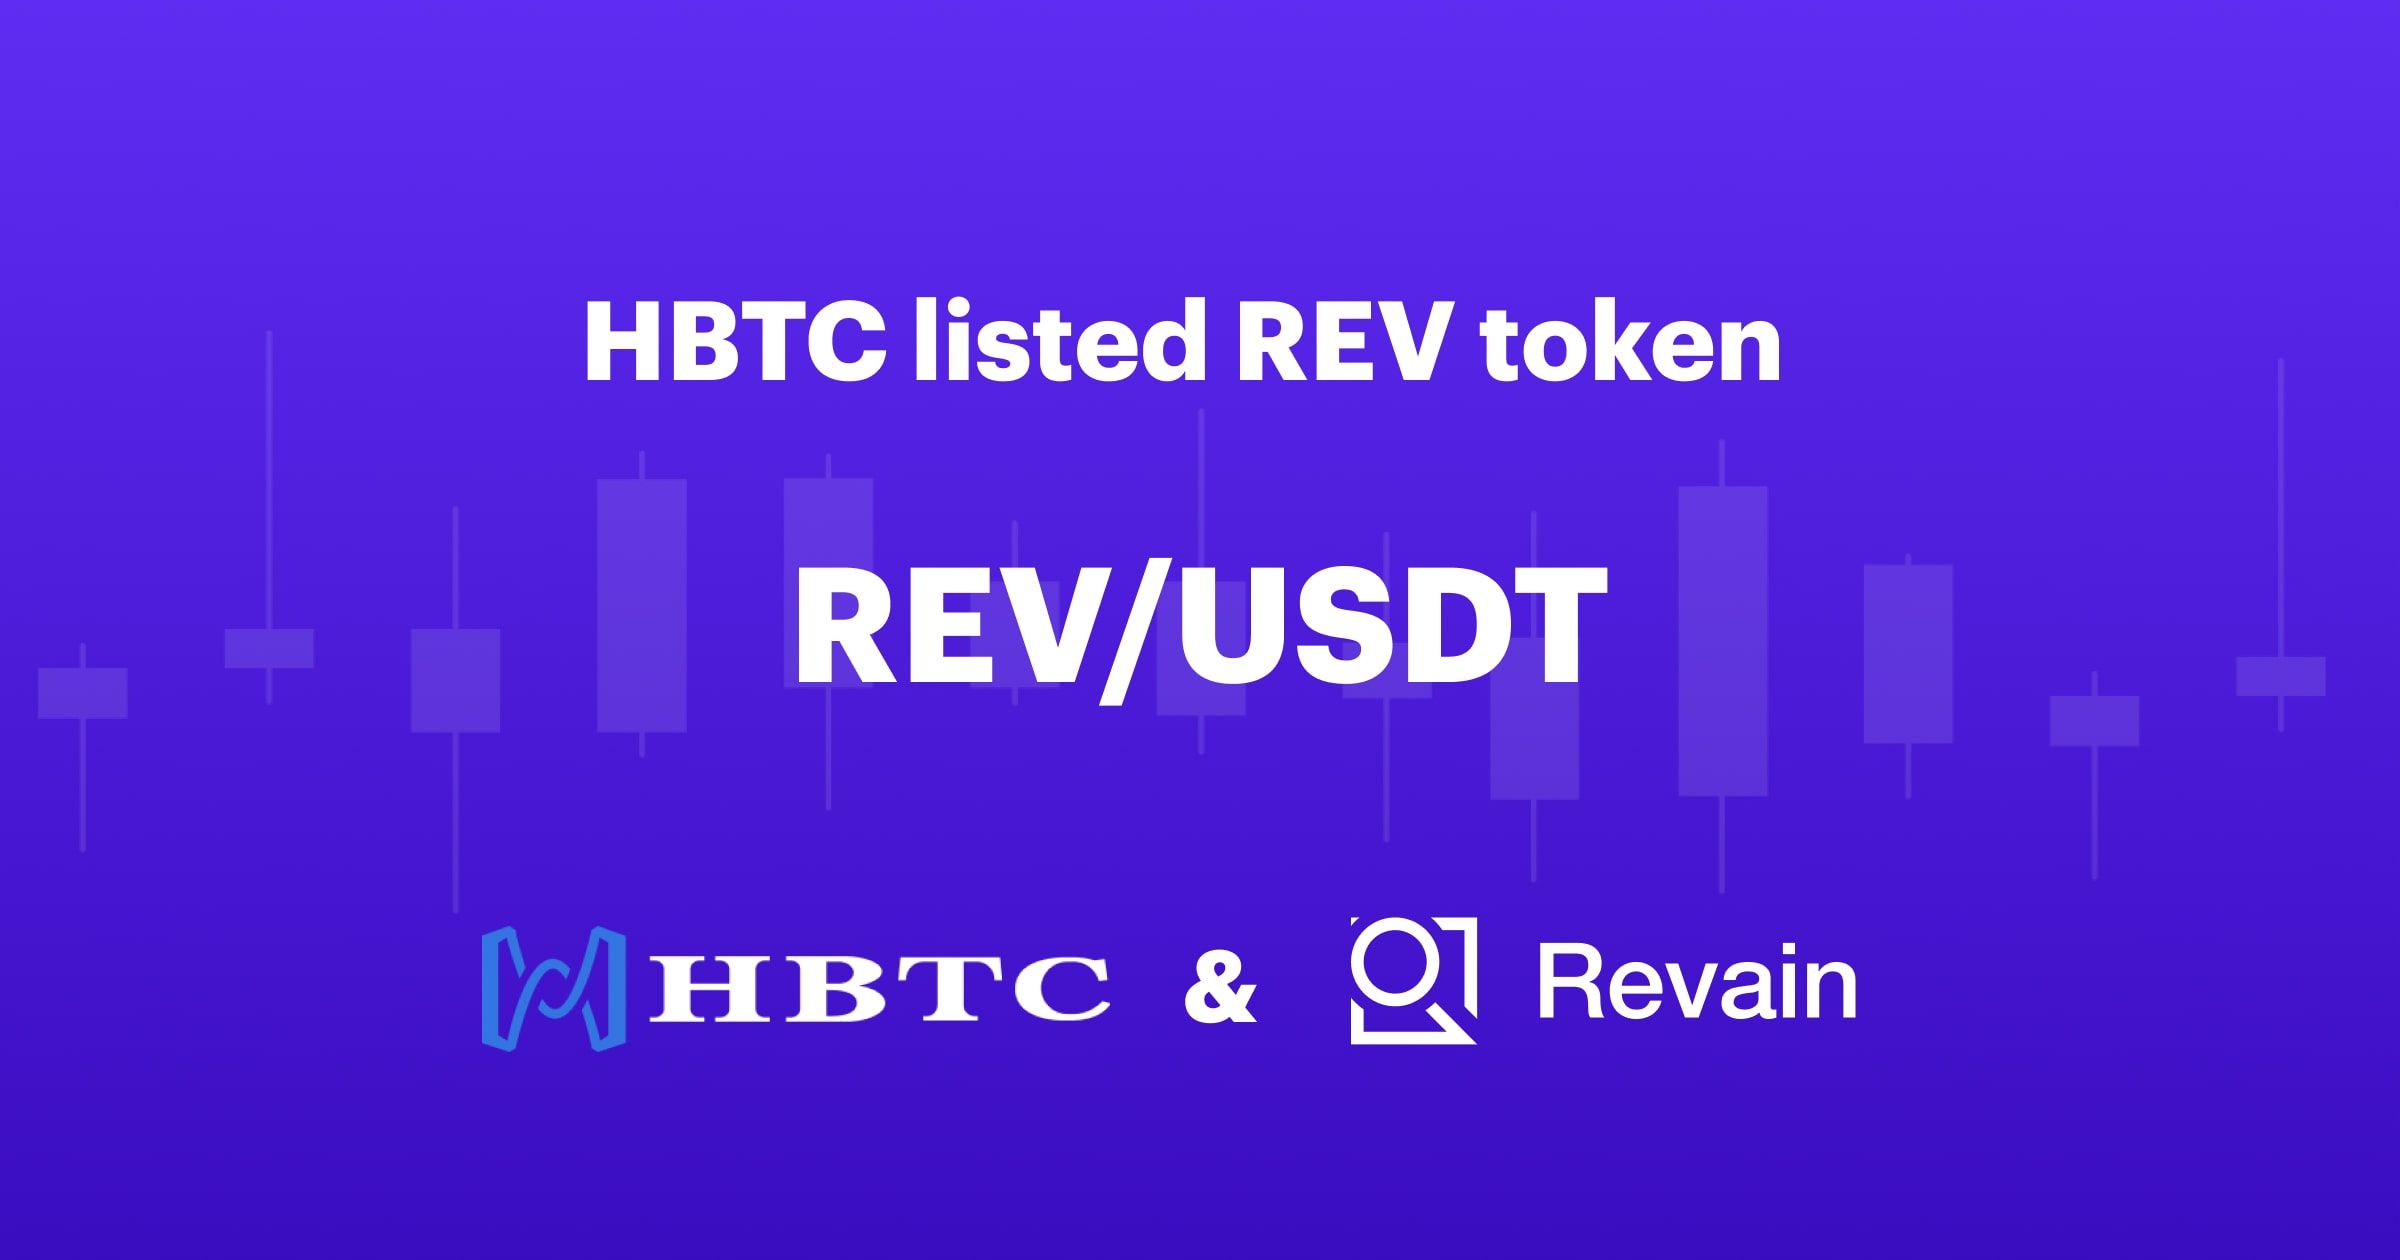 Revain is listed on the HBTC exchange